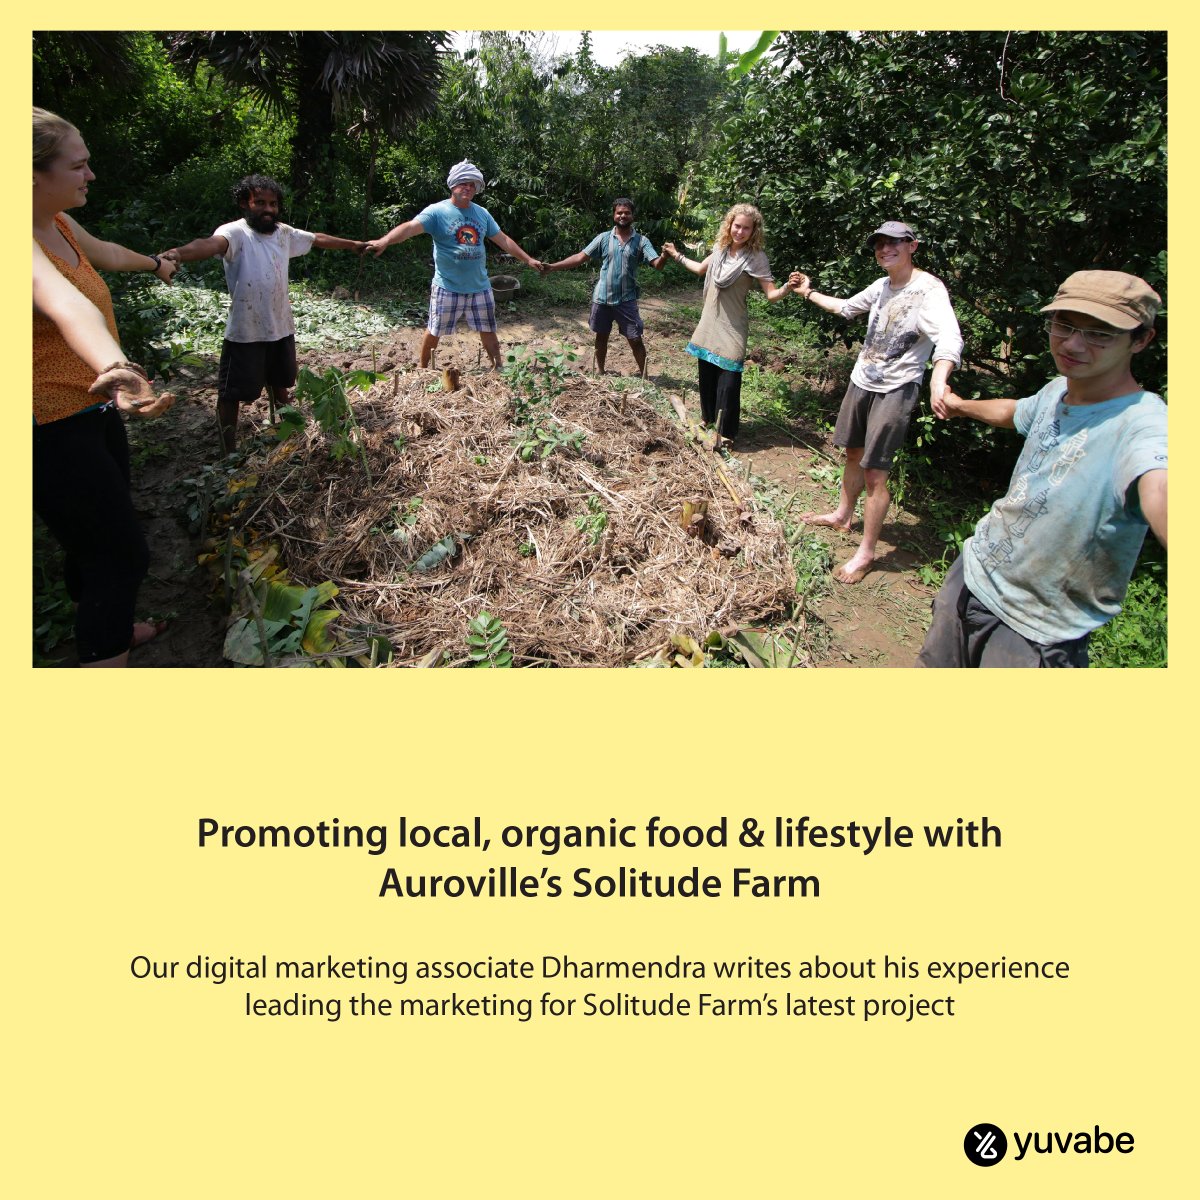 Joining forces with #Solitudefarm, we've elevated #local, organic produce through inventive social media, streamlined content management, and improved communication. Click the link to know more: yuvabe.com/post/digital-m…
#yuvabe #auroville #workserveevolve